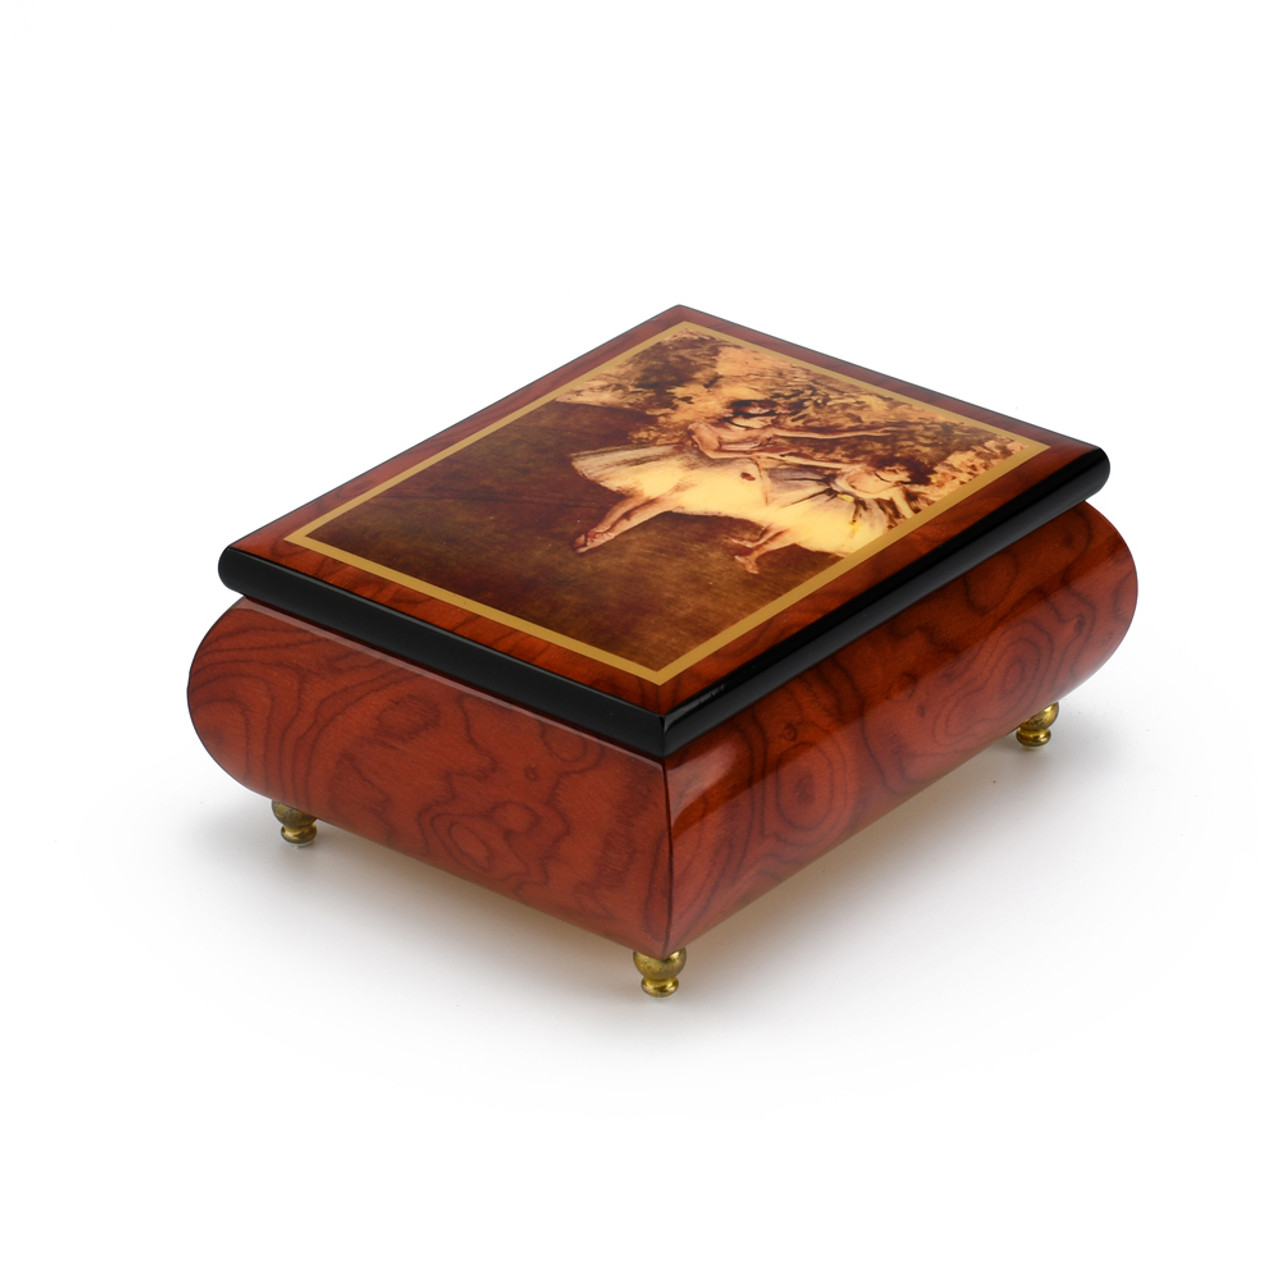 ballet lover gift-music box with dancers on stage by degas